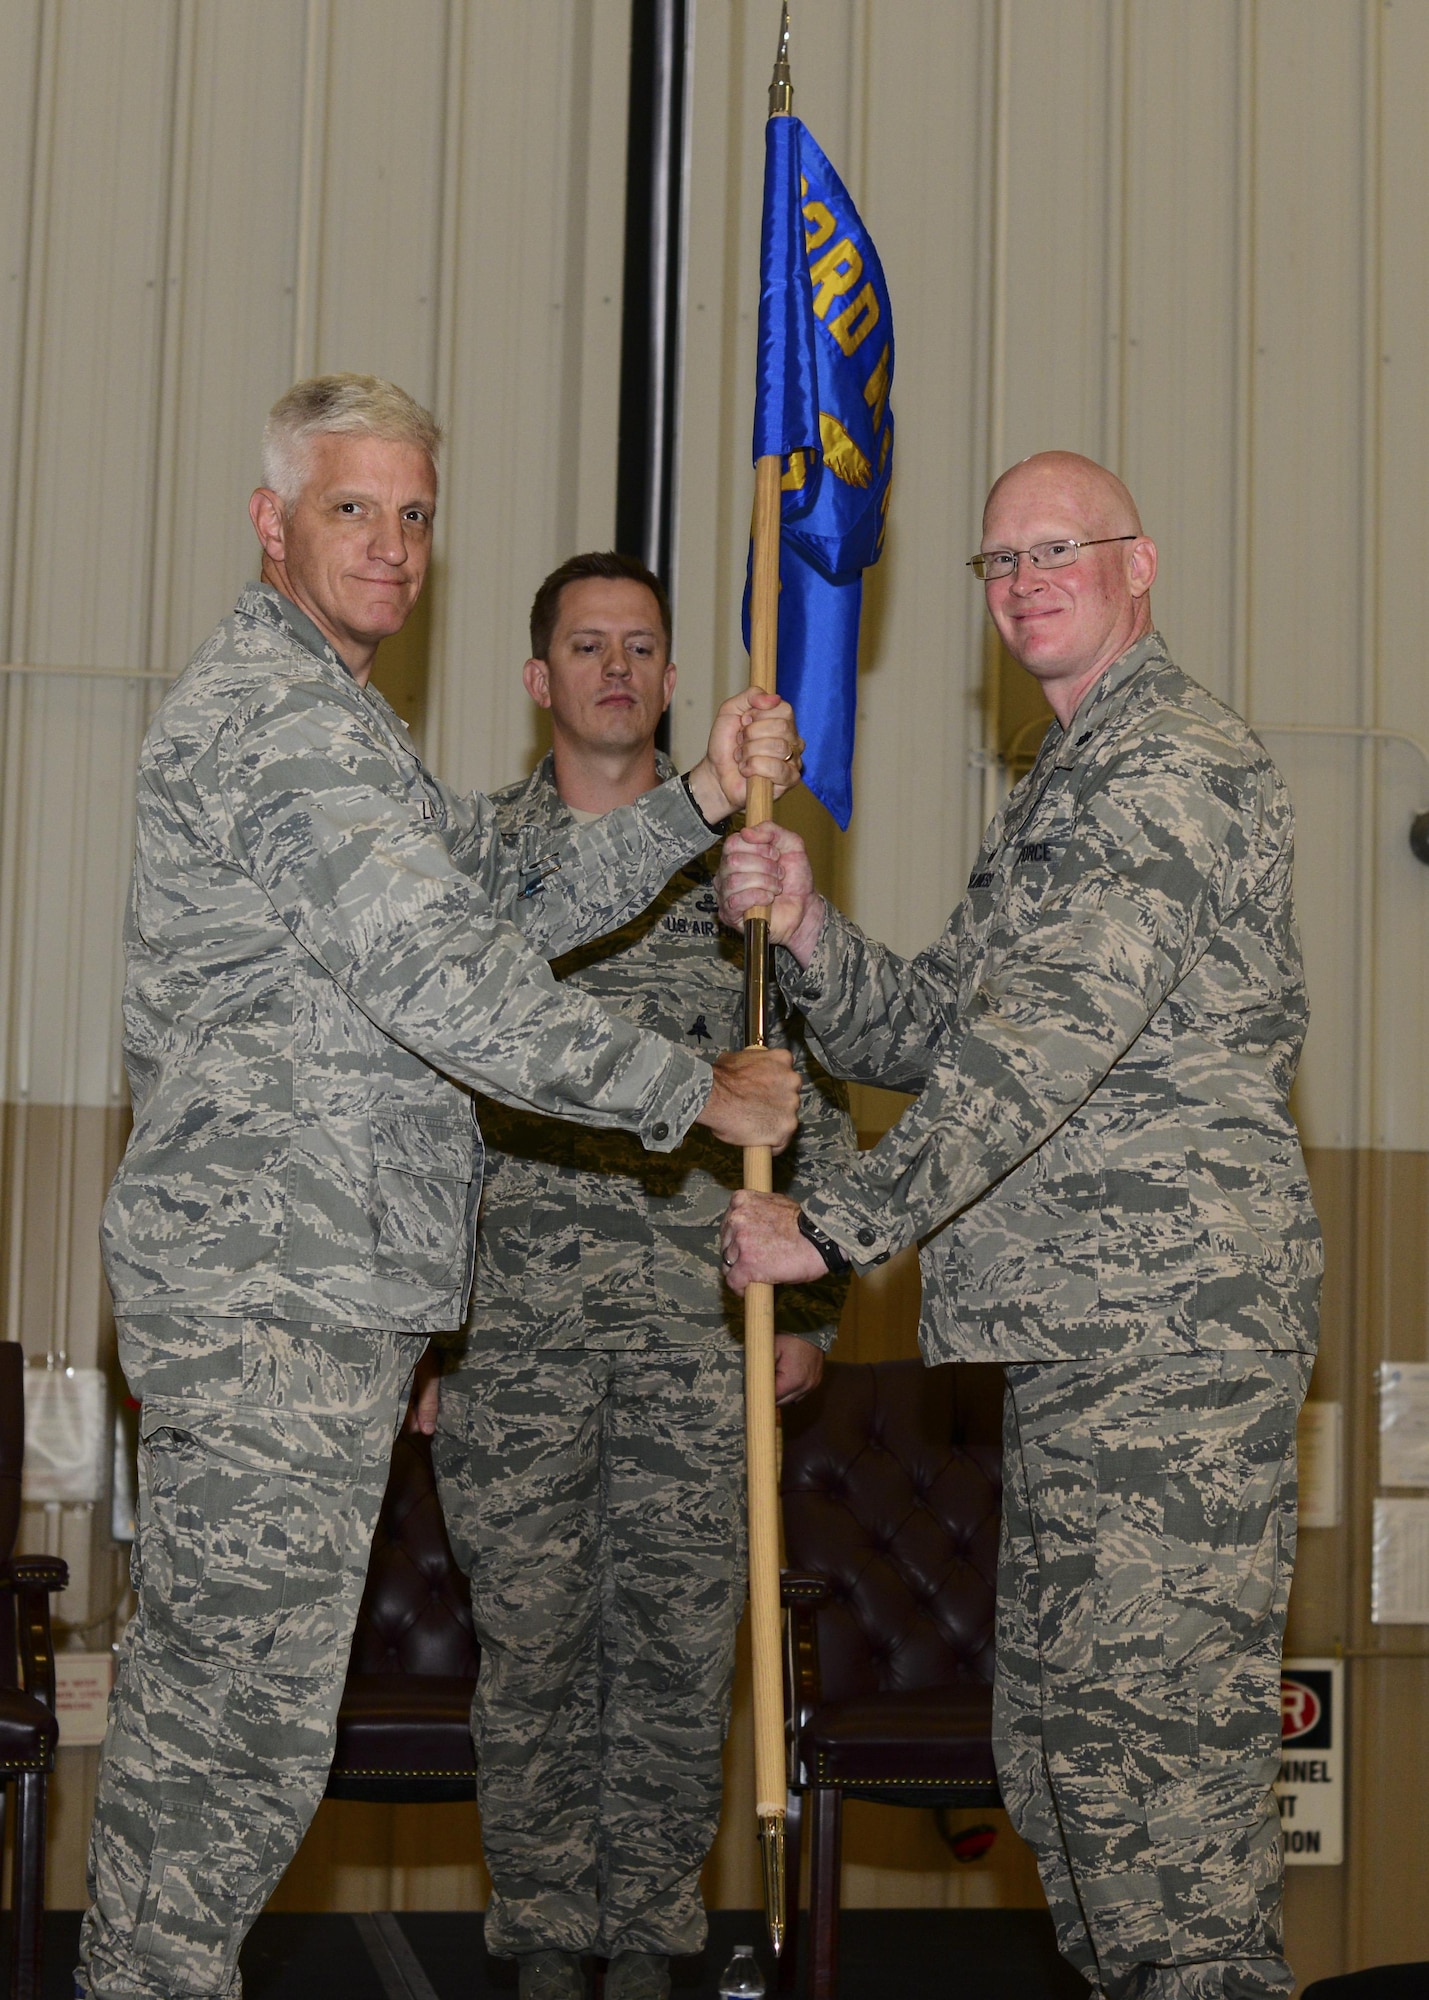 U.S. Air Force Lt. Col. Matthew McGuinness, 68th Rescue Squadron commander, receives the guidon from Col. John Lussier, 563rd Rescue Group commander, during a change of command ceremony at Davis-Monthan Air Force Base, Ariz., June 1st, 2017. Capt. Michael Ellingsen, then-68th Rescue Flight commander, relinquished command to McGuinness at the ceremony and the 68th RQF transitioned to the 68th RQS. (U.S. Air Force photo by Airman 1st Class Nathan H. Barbour)